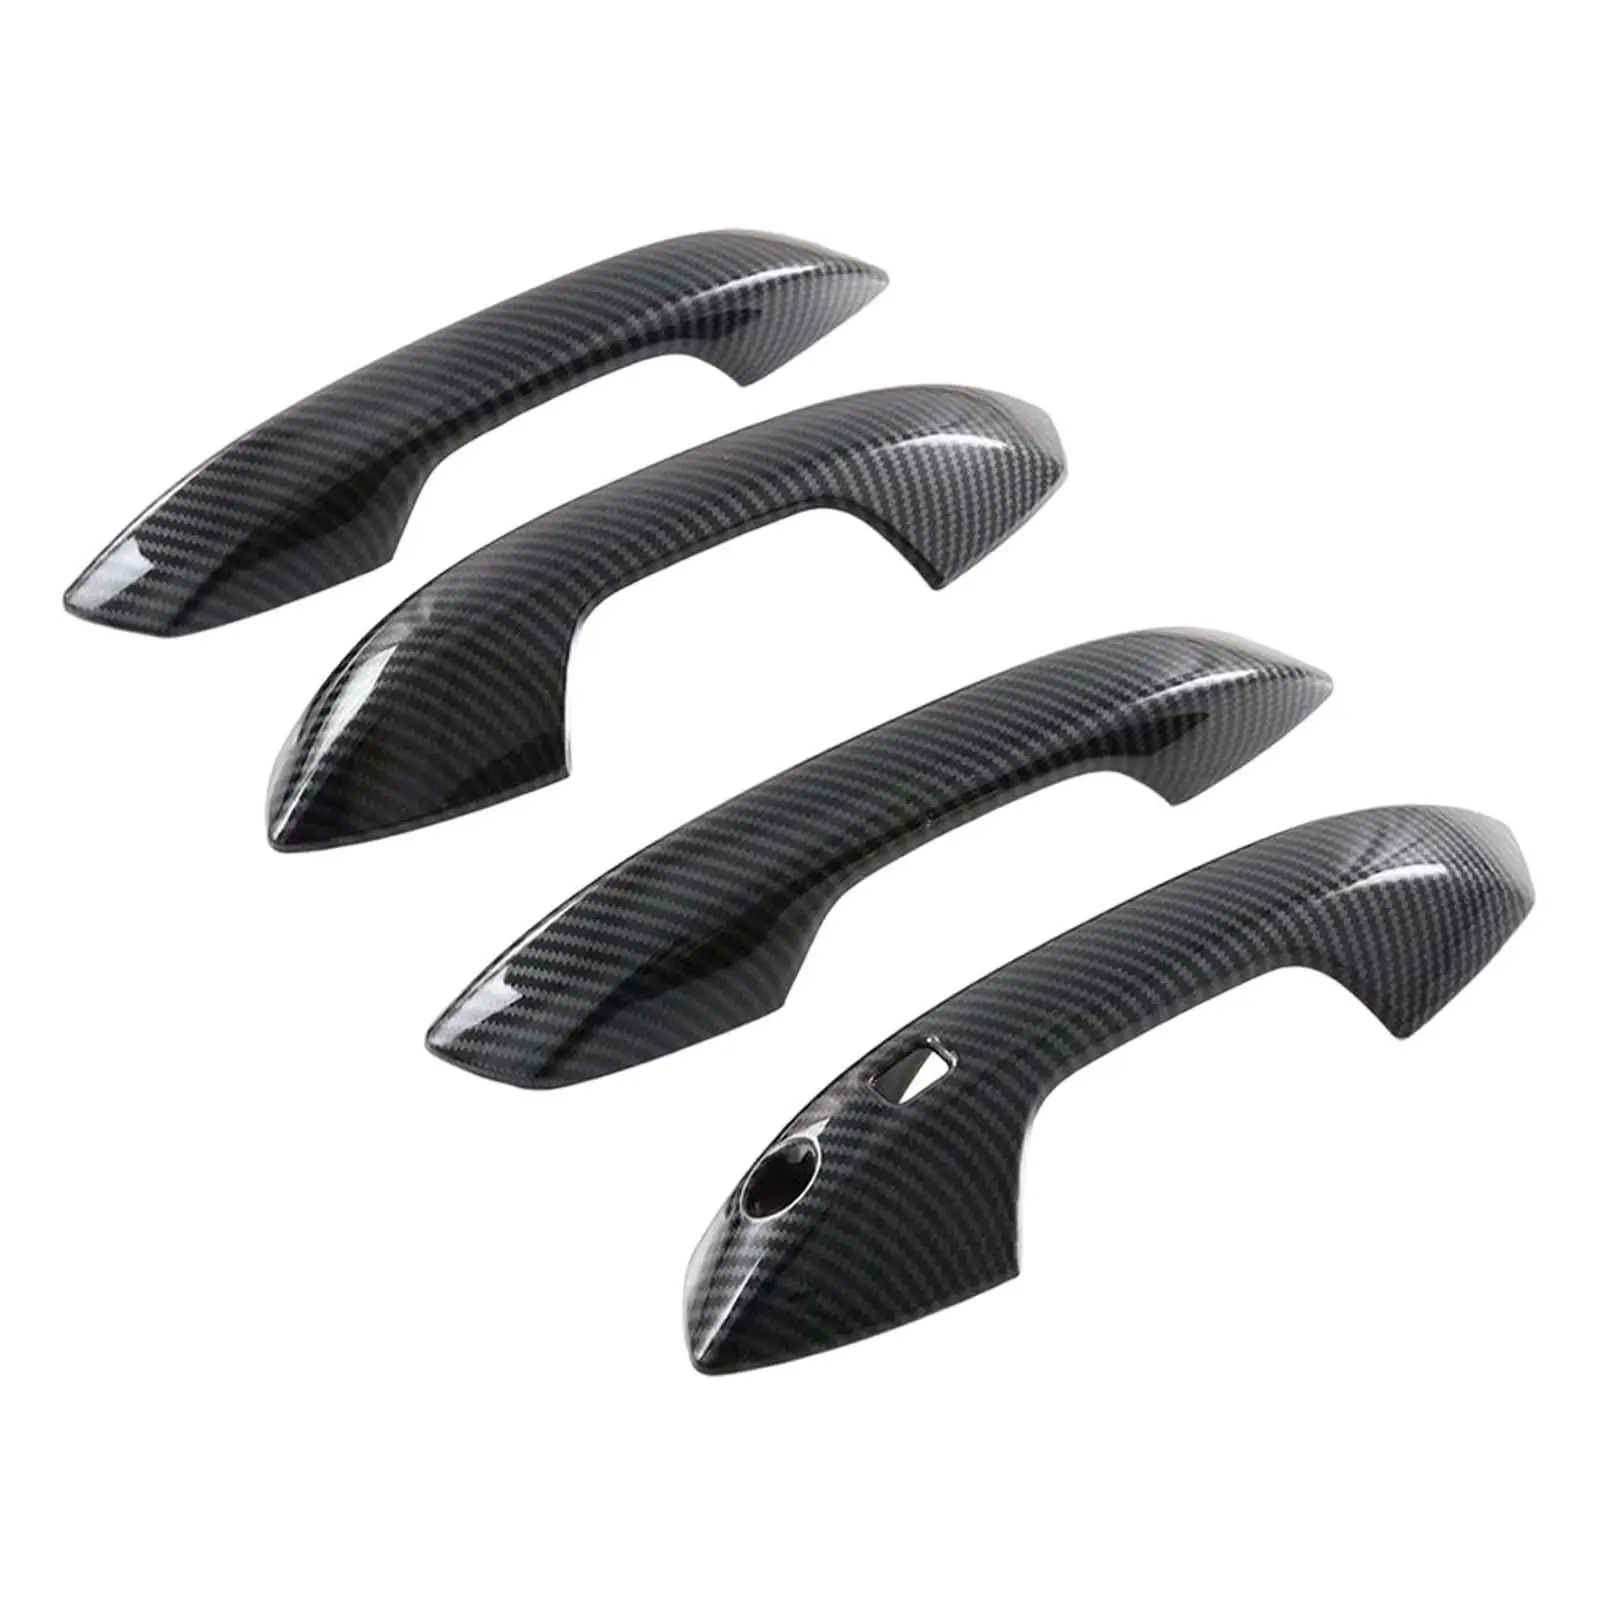 4 Pieces Car Door Handle Protective Cover Accessories Easy to Install Scratch Resistant Durable Protector for Byd Yuan Plus